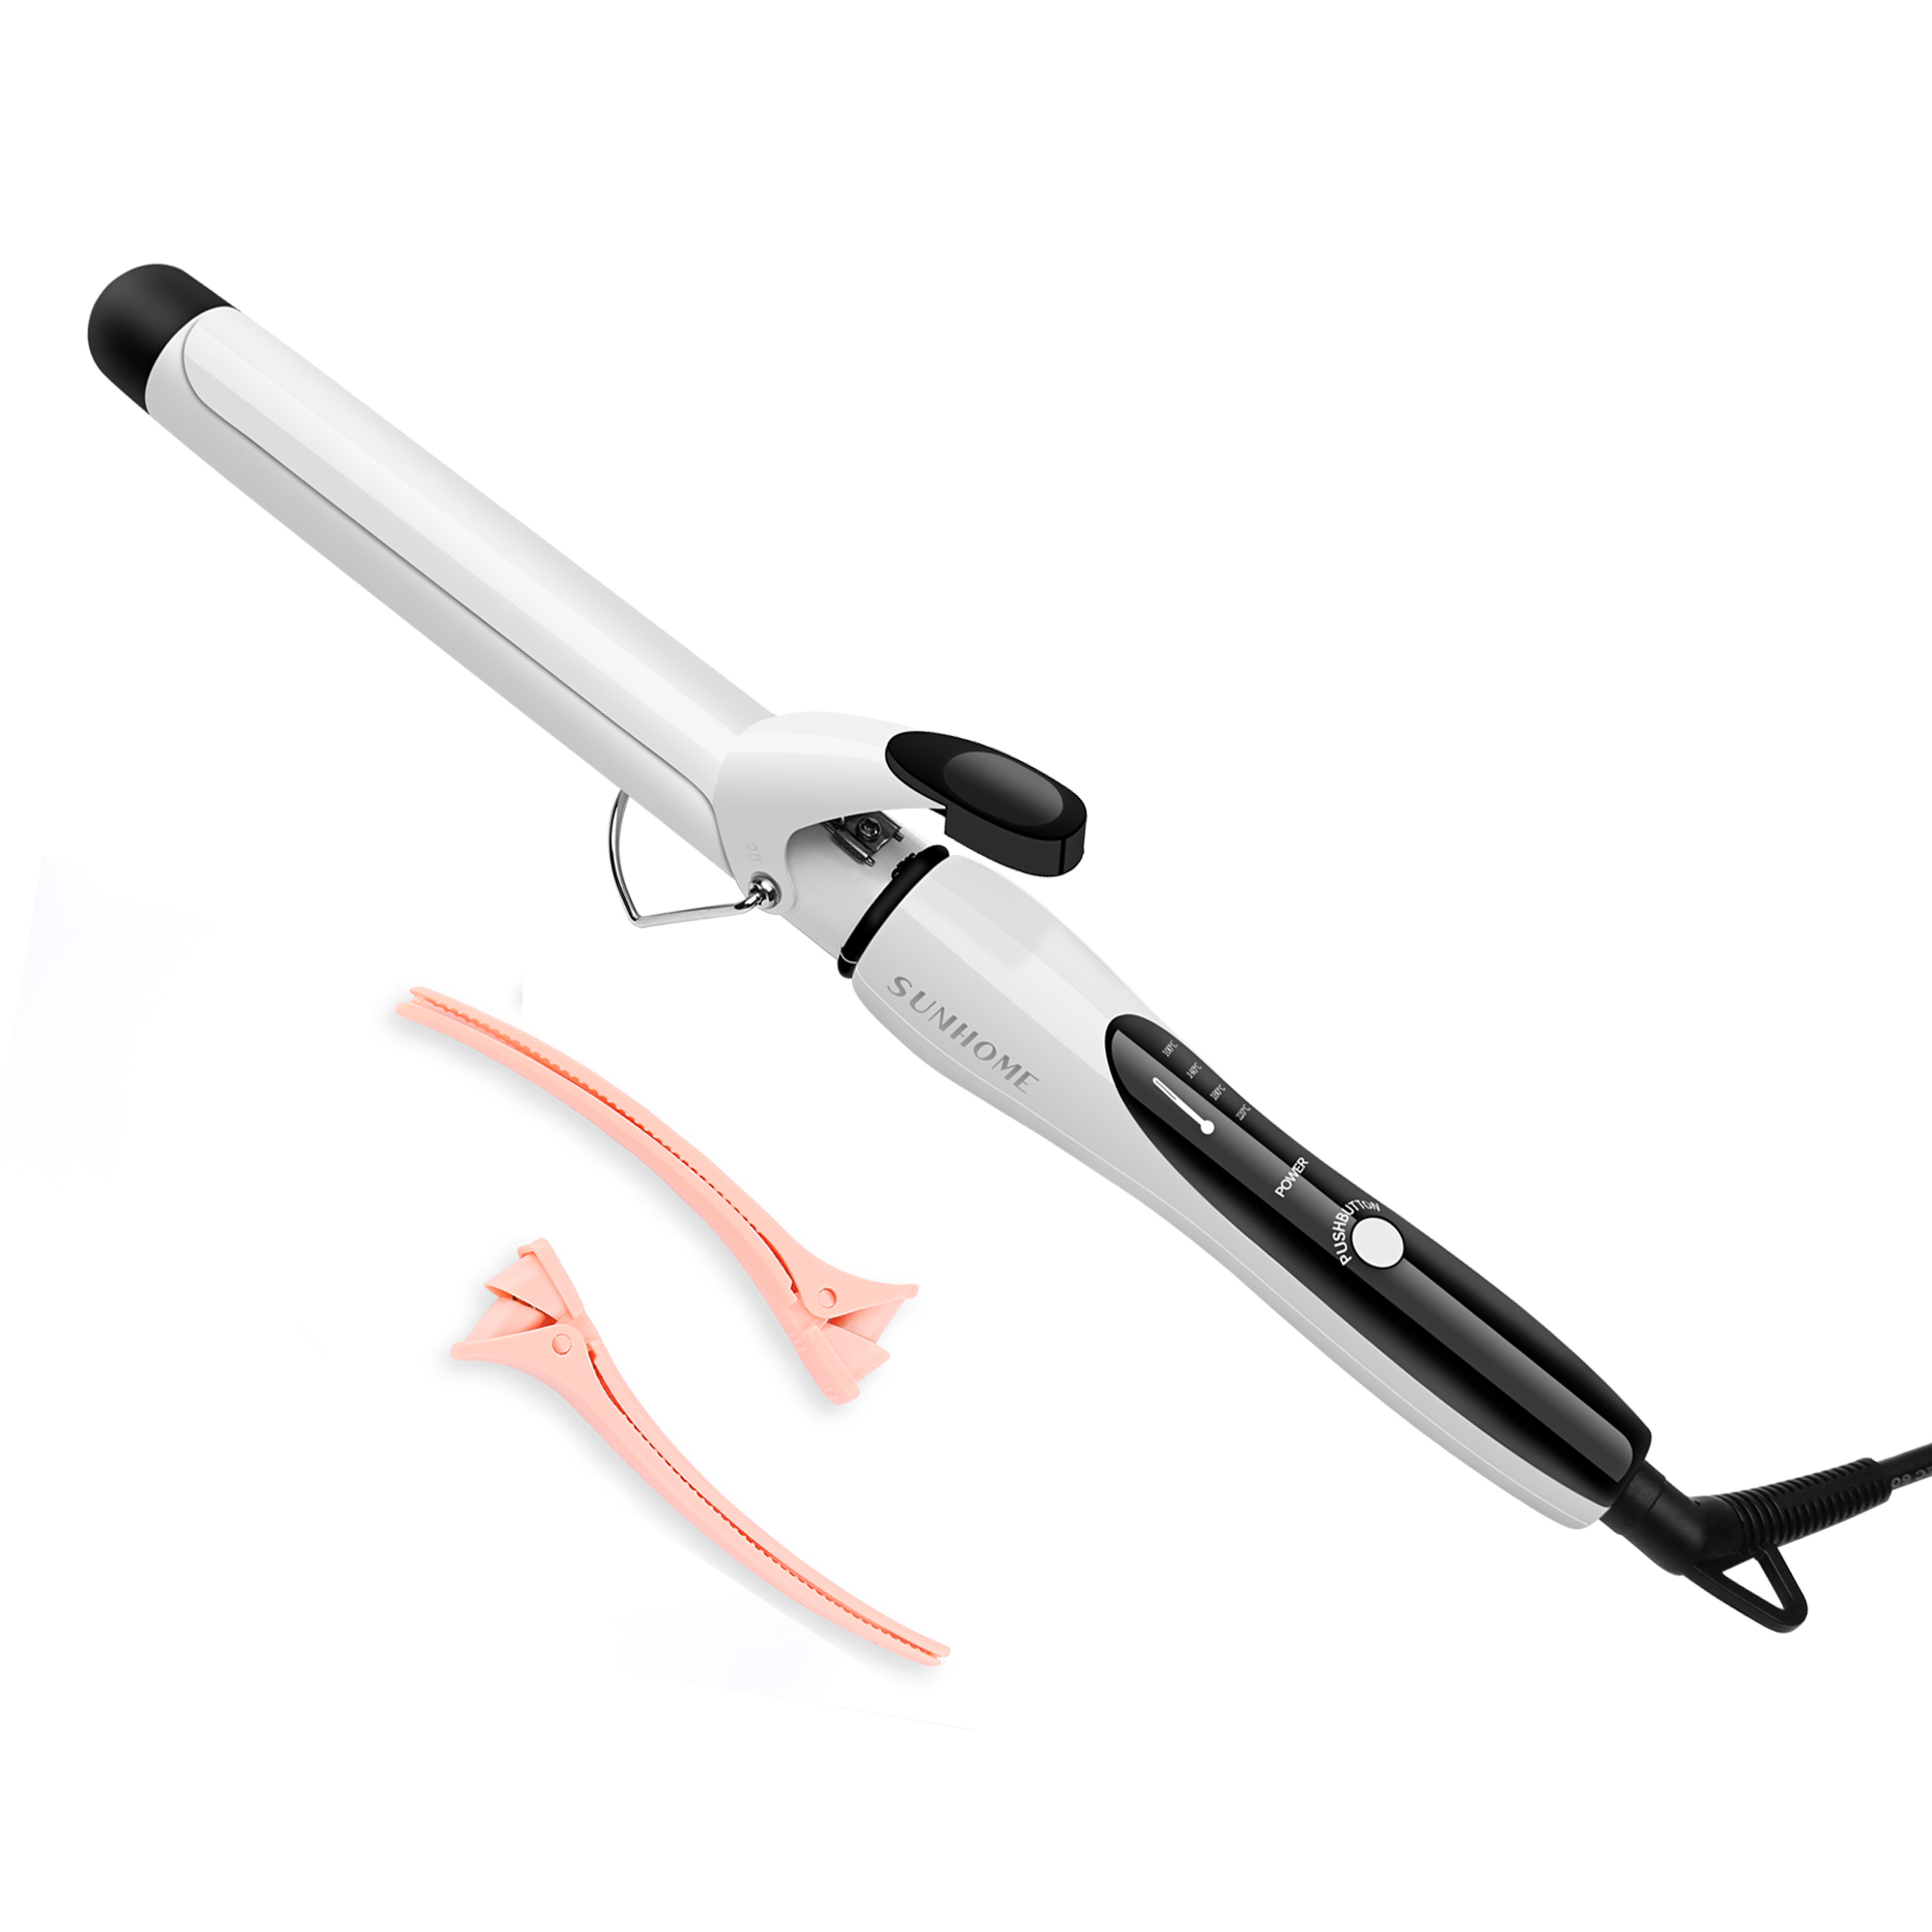 SUNHOME Professional Curling Iron Wand, 28mm Hair Curler and 4 Adjustable Temps for Professional Hair Styling(White)